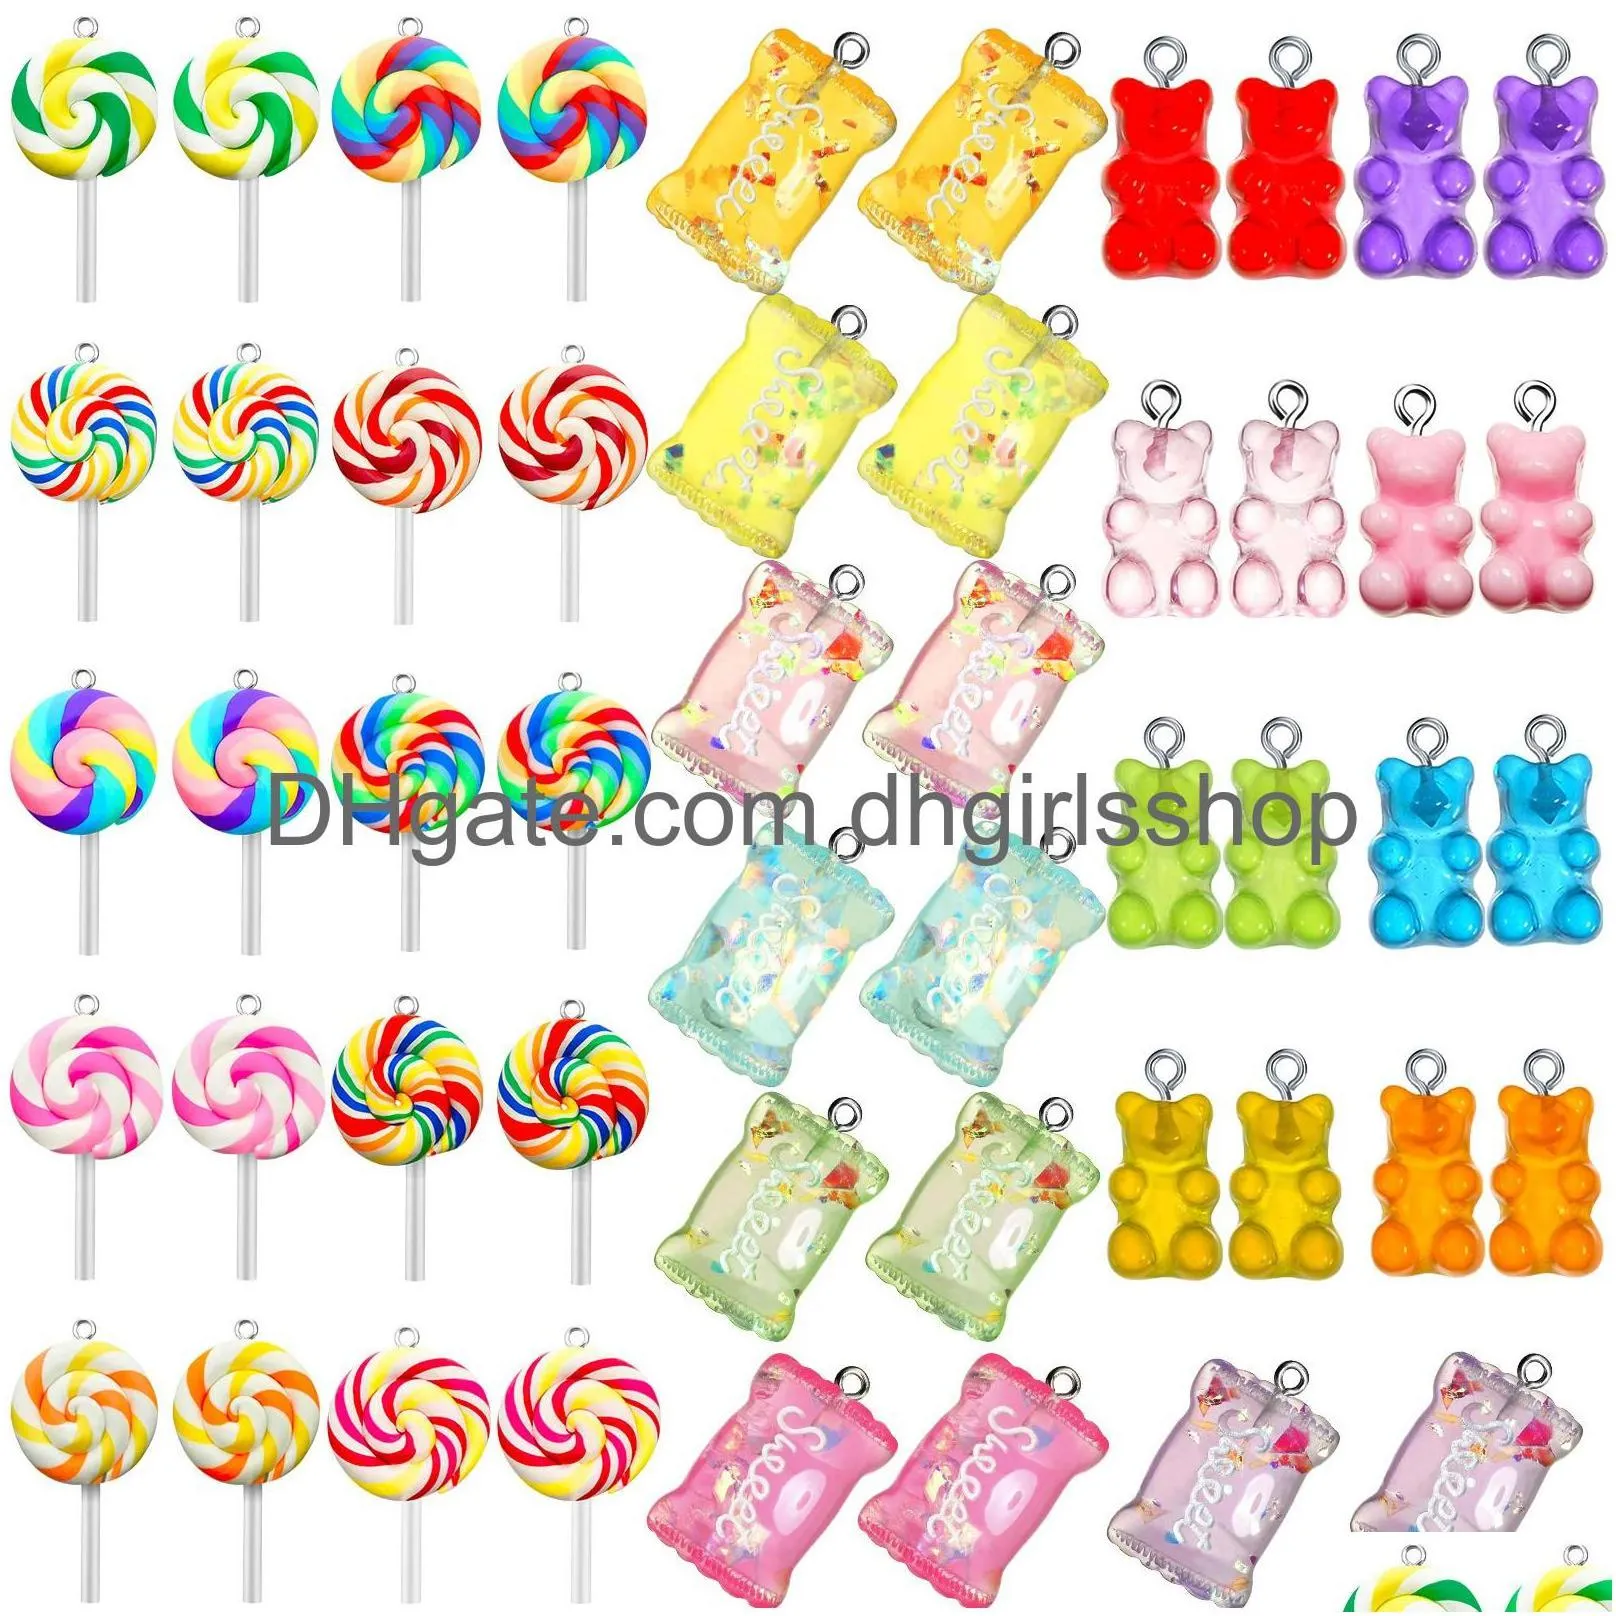 pendant necklaces sweet candy colorf shape charms gummy bear pendants lollipop polymer clay for earrings necklace bracelet diy jewelr